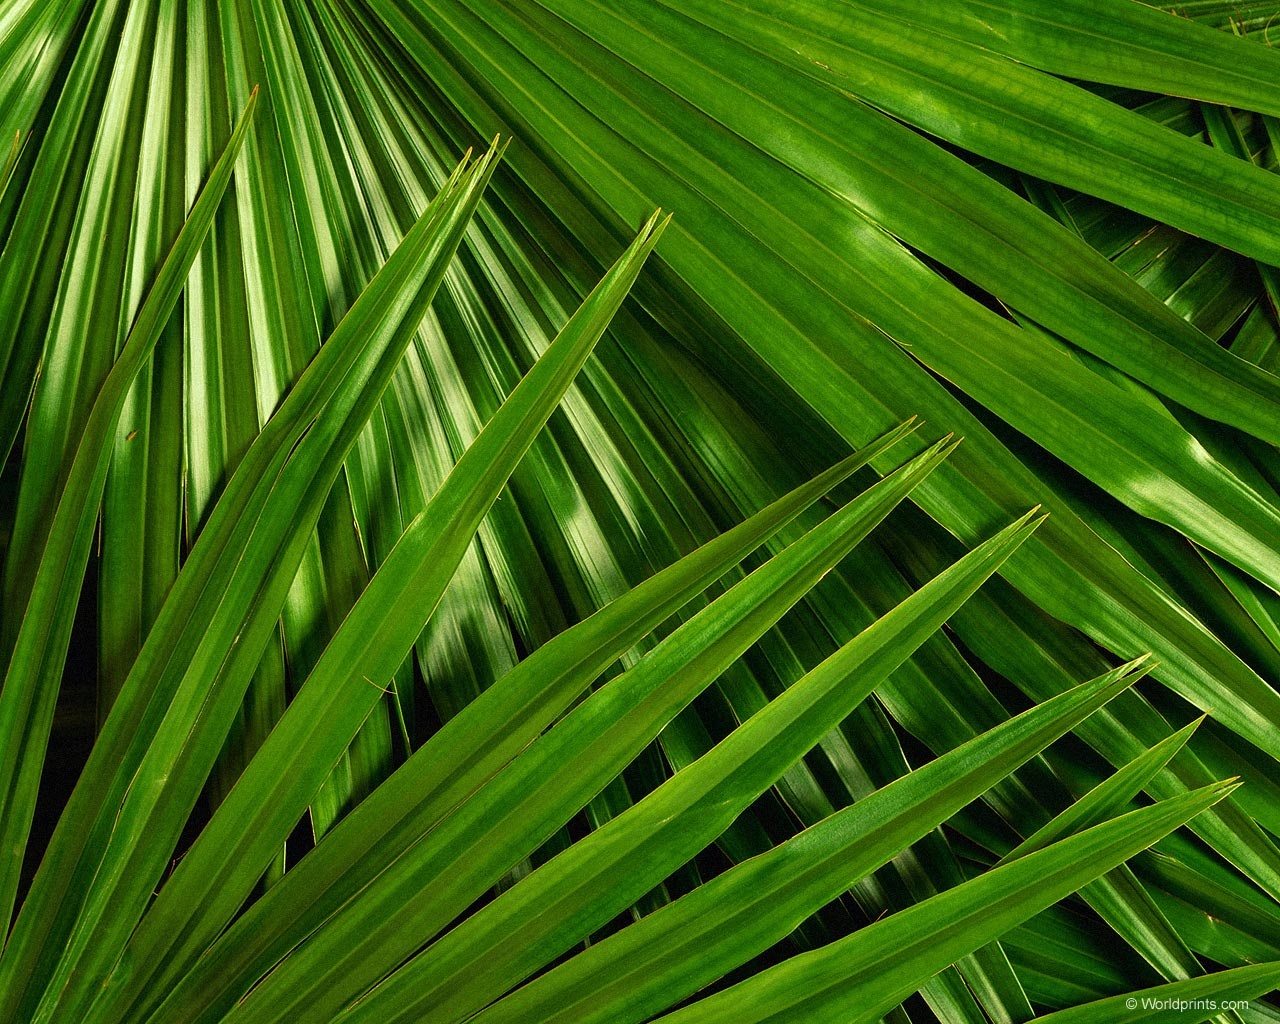 palm leaves WallpaperSuggestcom wallpapers 1280x1024